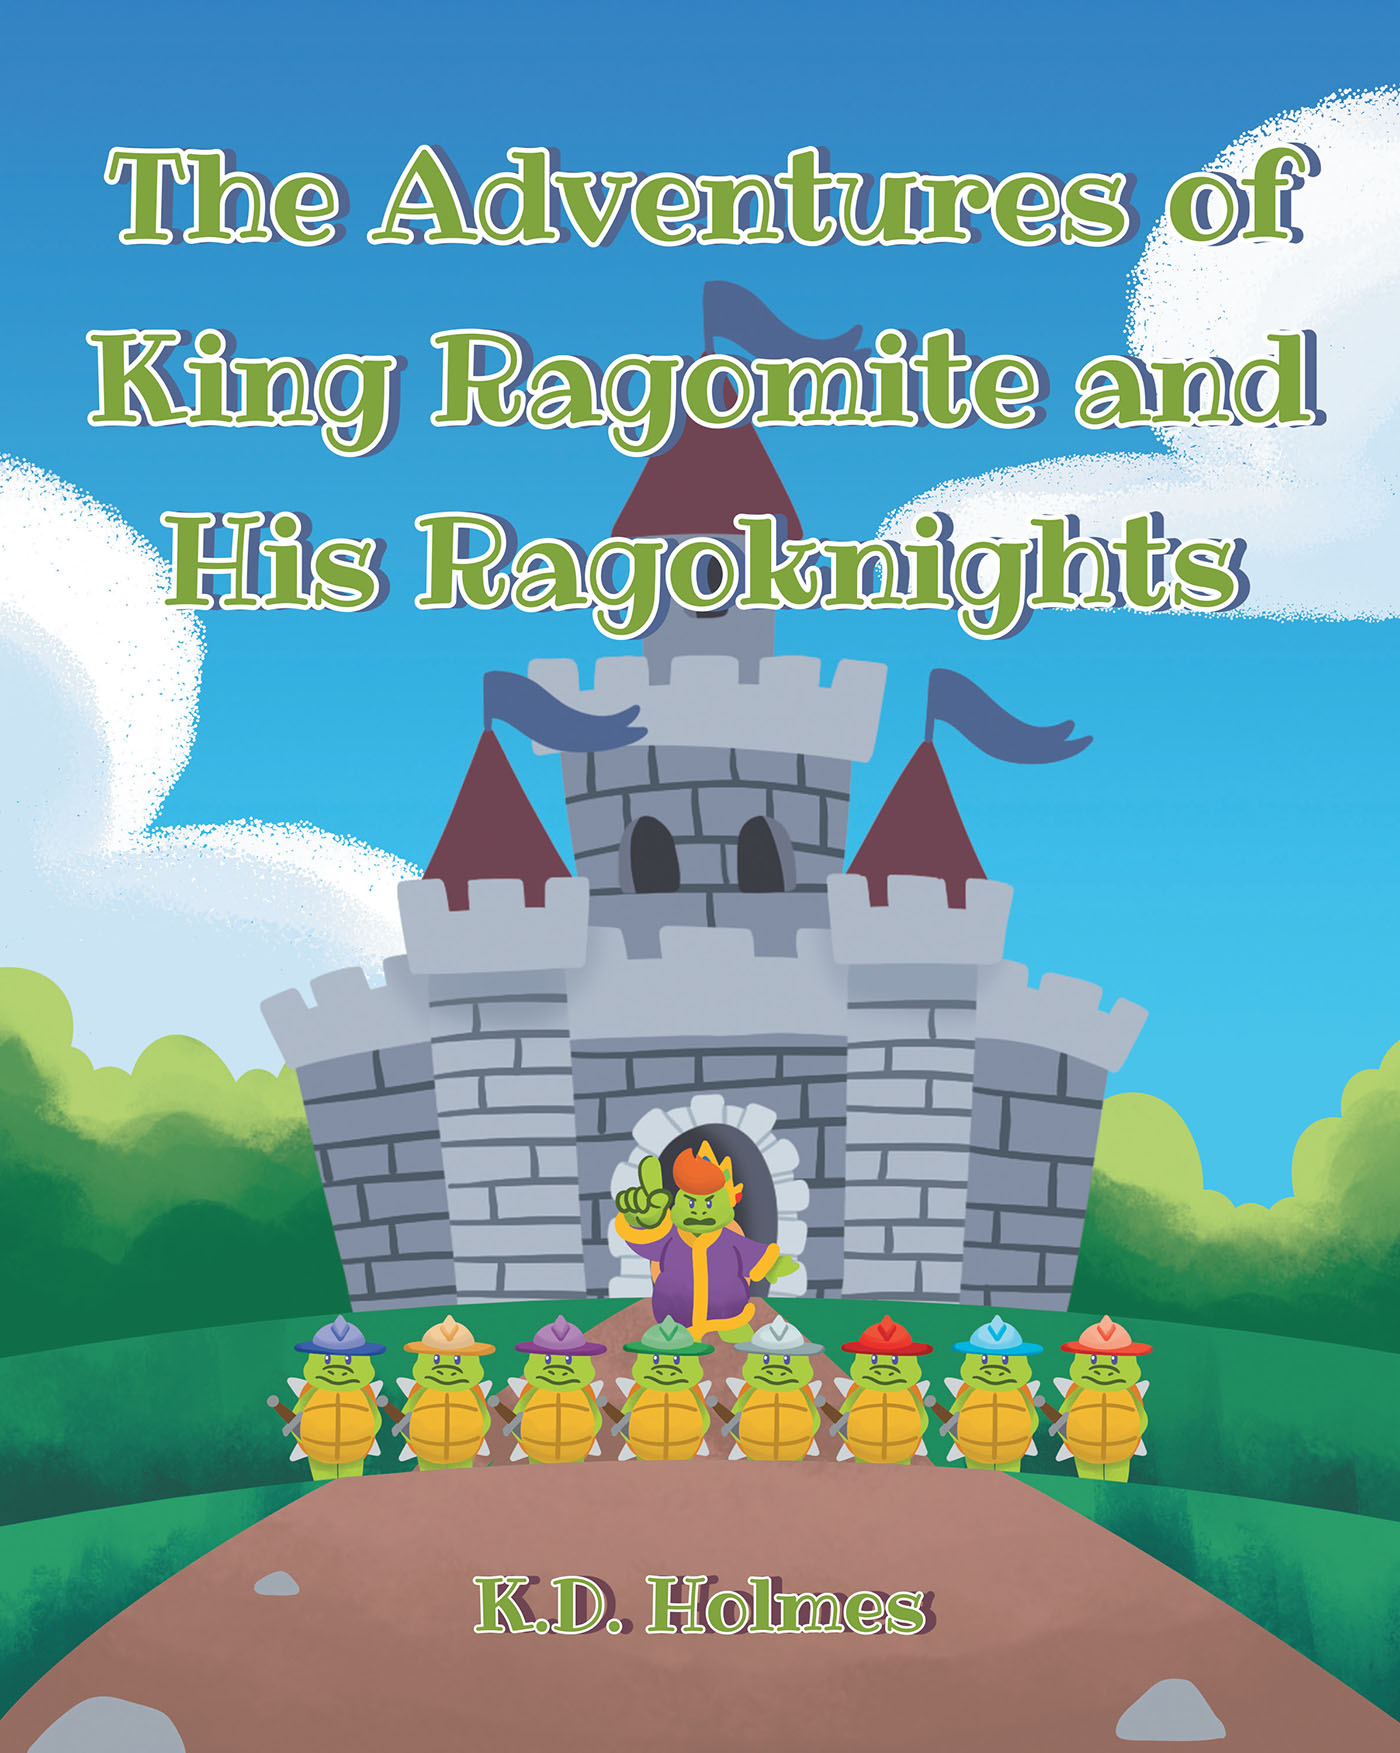 Author K.D. Holmes’s New Book, "The Adventures of King Ragomite and His Ragoknights," Follows a King Who Learns His Daughter Has Been Stolen & an Old Enemy Has Returned